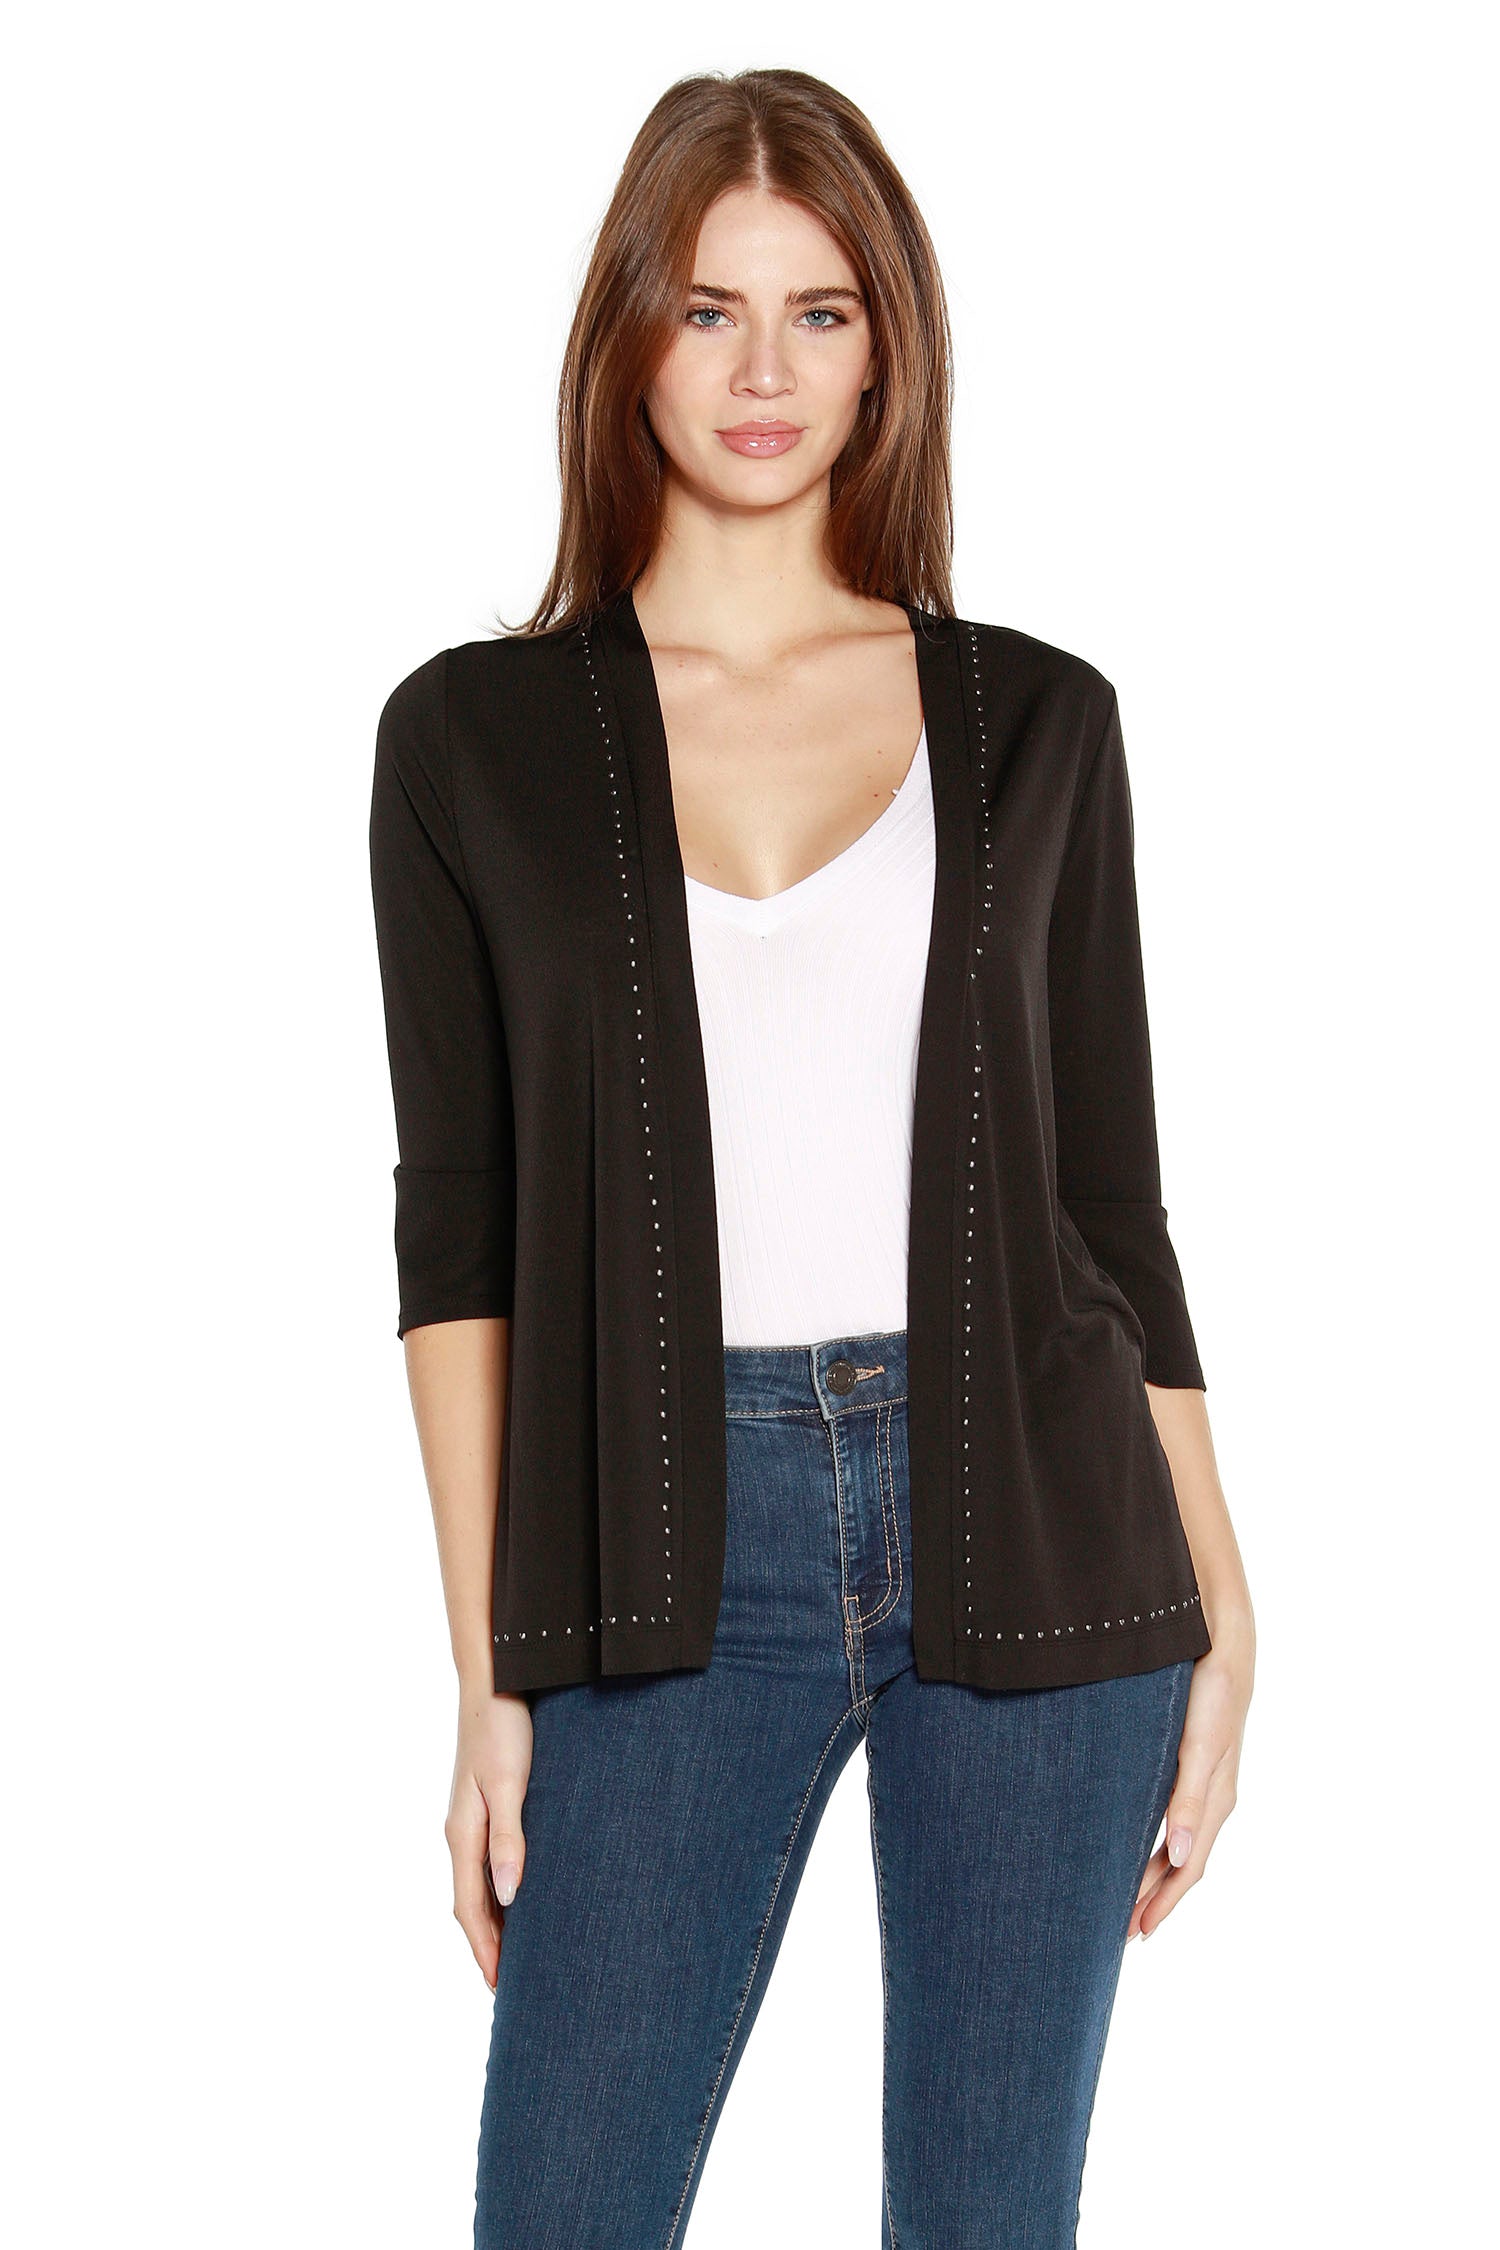 Women's Open Front Cardigan with 3/4 Sleeves and Nailhead Trim